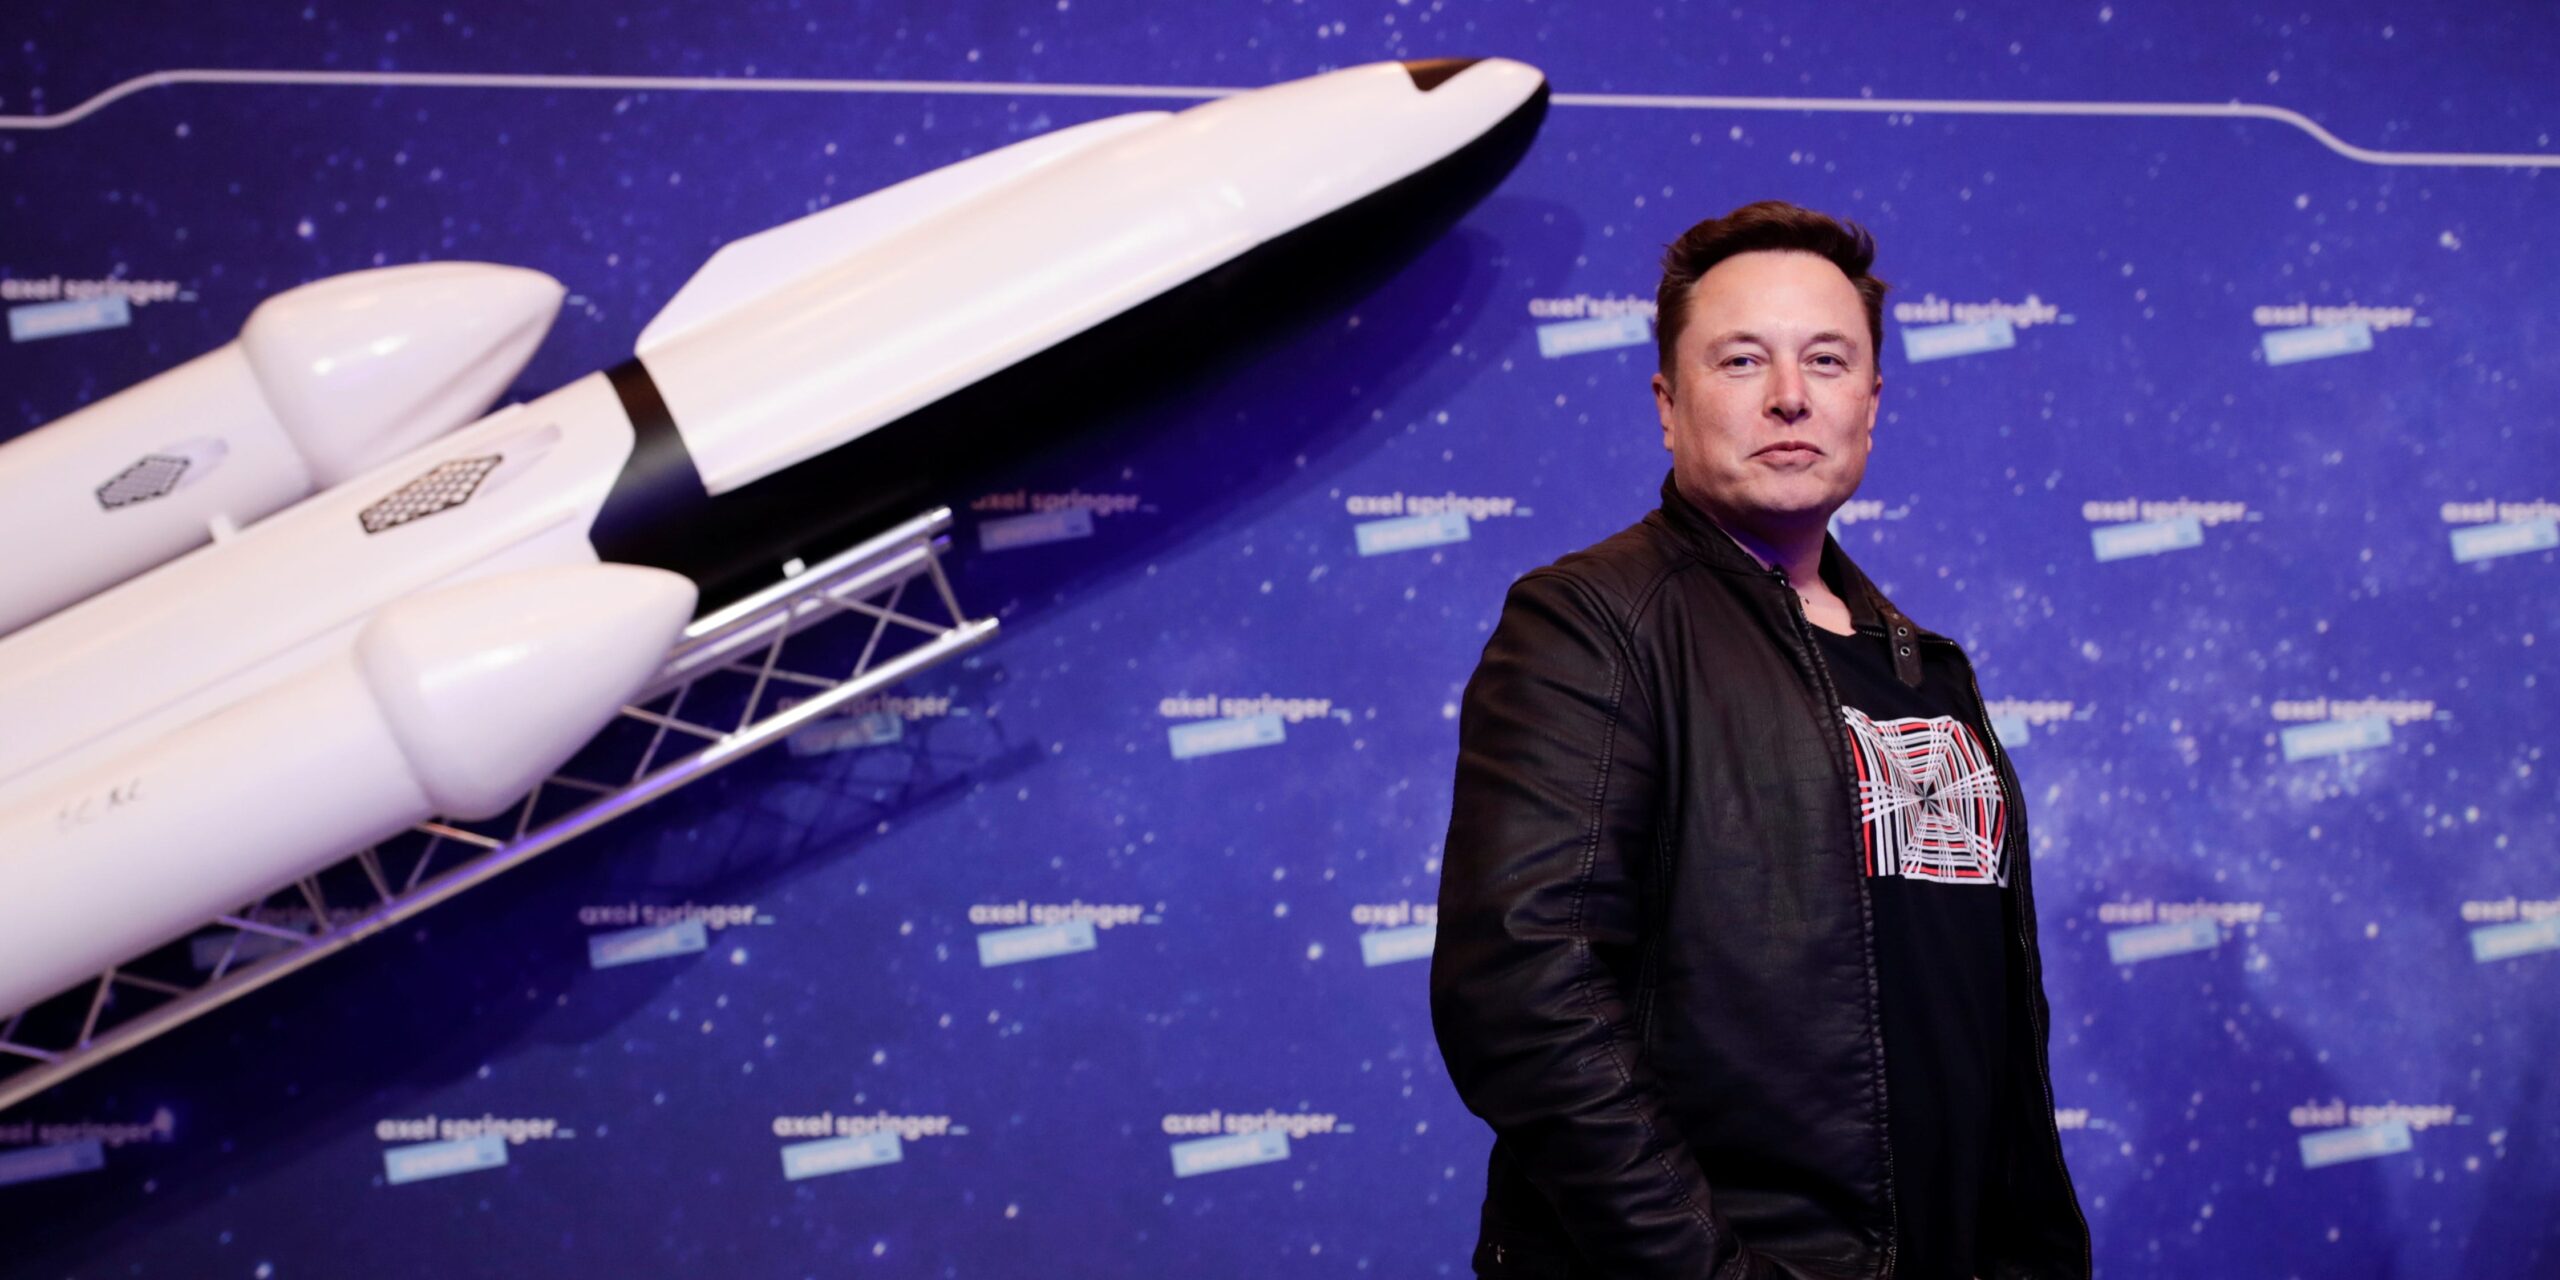 Elon Musk once again says SpaceX’s Starlink internet service will IPO once its cash flow is more predictable